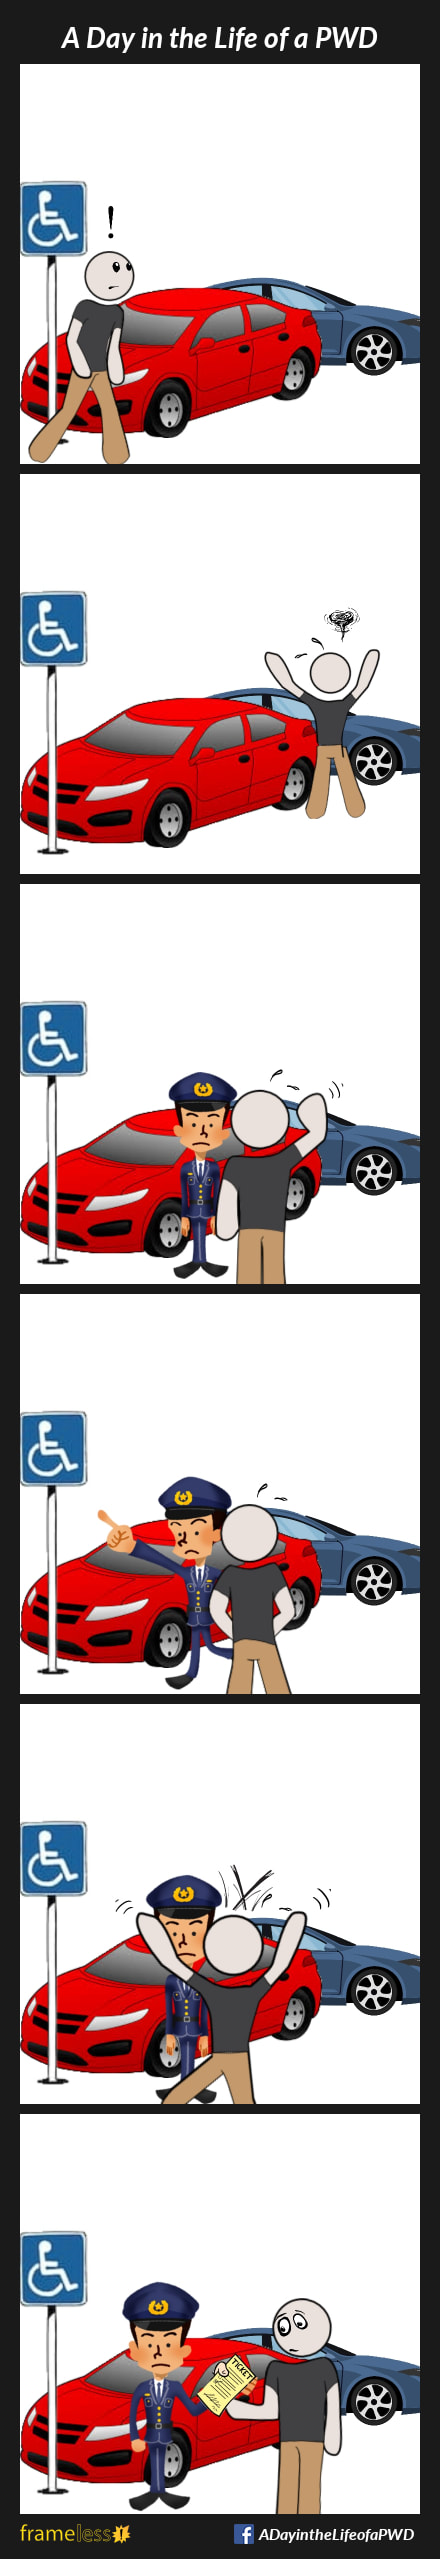 COMIC STRIP 
A Day in the Life of a PWD (Person With a Disability) 

Frame 1:
A man returns to his car, which is parked in an accessible stall without a permit.
He notices his car is blocked in by another vehicle.

Frame 2:
The man investigates, and becomes furious.

Frame 3:
The man complains to a police officer.

Frame 4:
Irritated, the officer points to the accessible parking sign.

Frame 5:
The man rages.

Frame 6:
The officer hands the man a ticket.